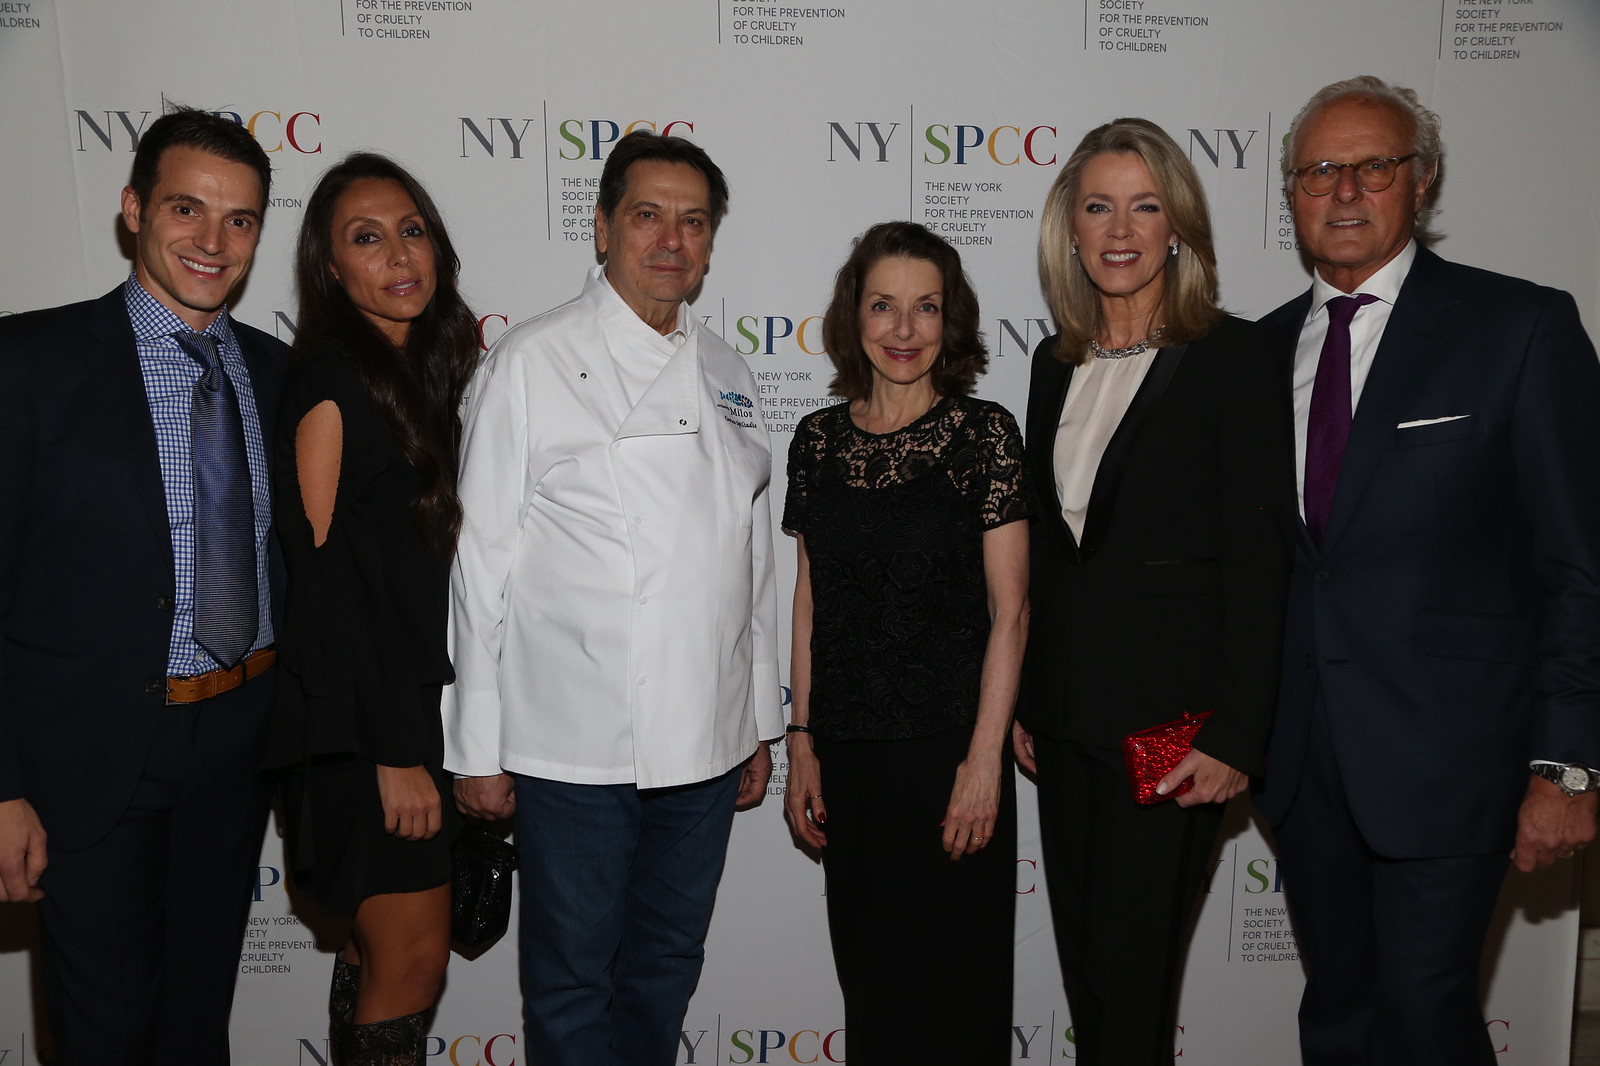 The New York Society For The Prevention Of Cruelty To Children's 2018 Food & Wine Gala